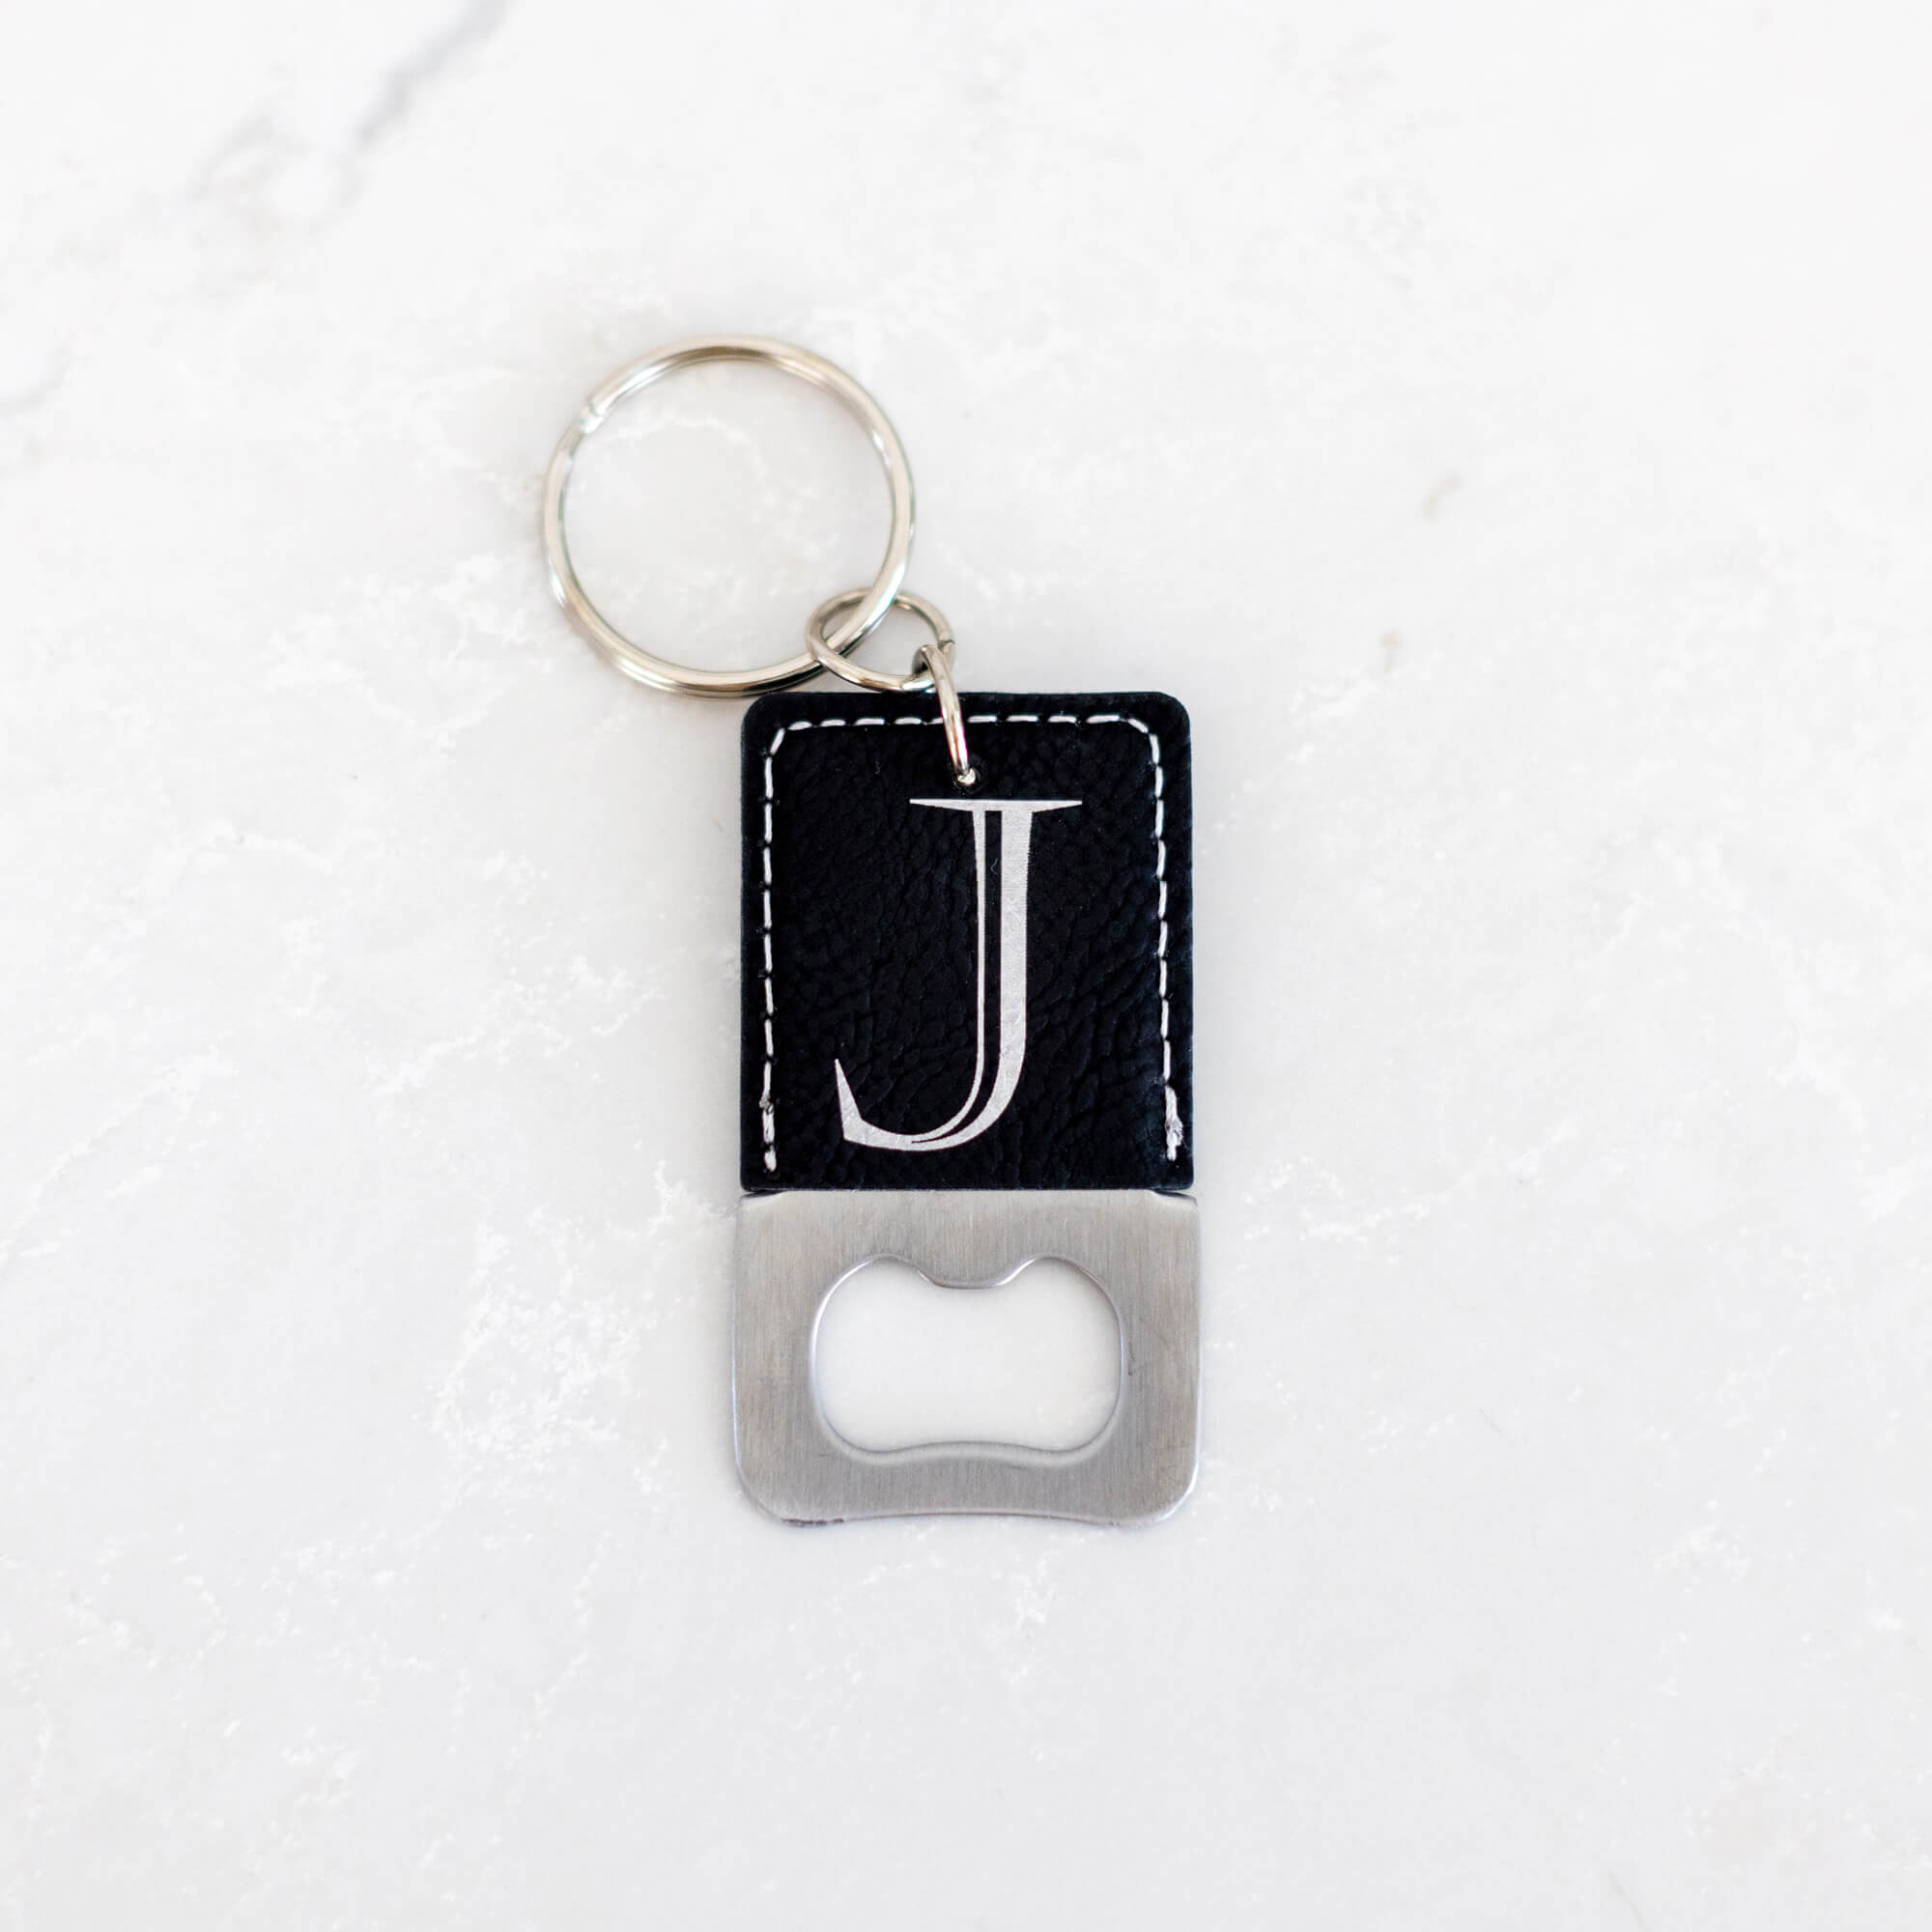 Vegan Leather Bottle Opener Keychain with Initial